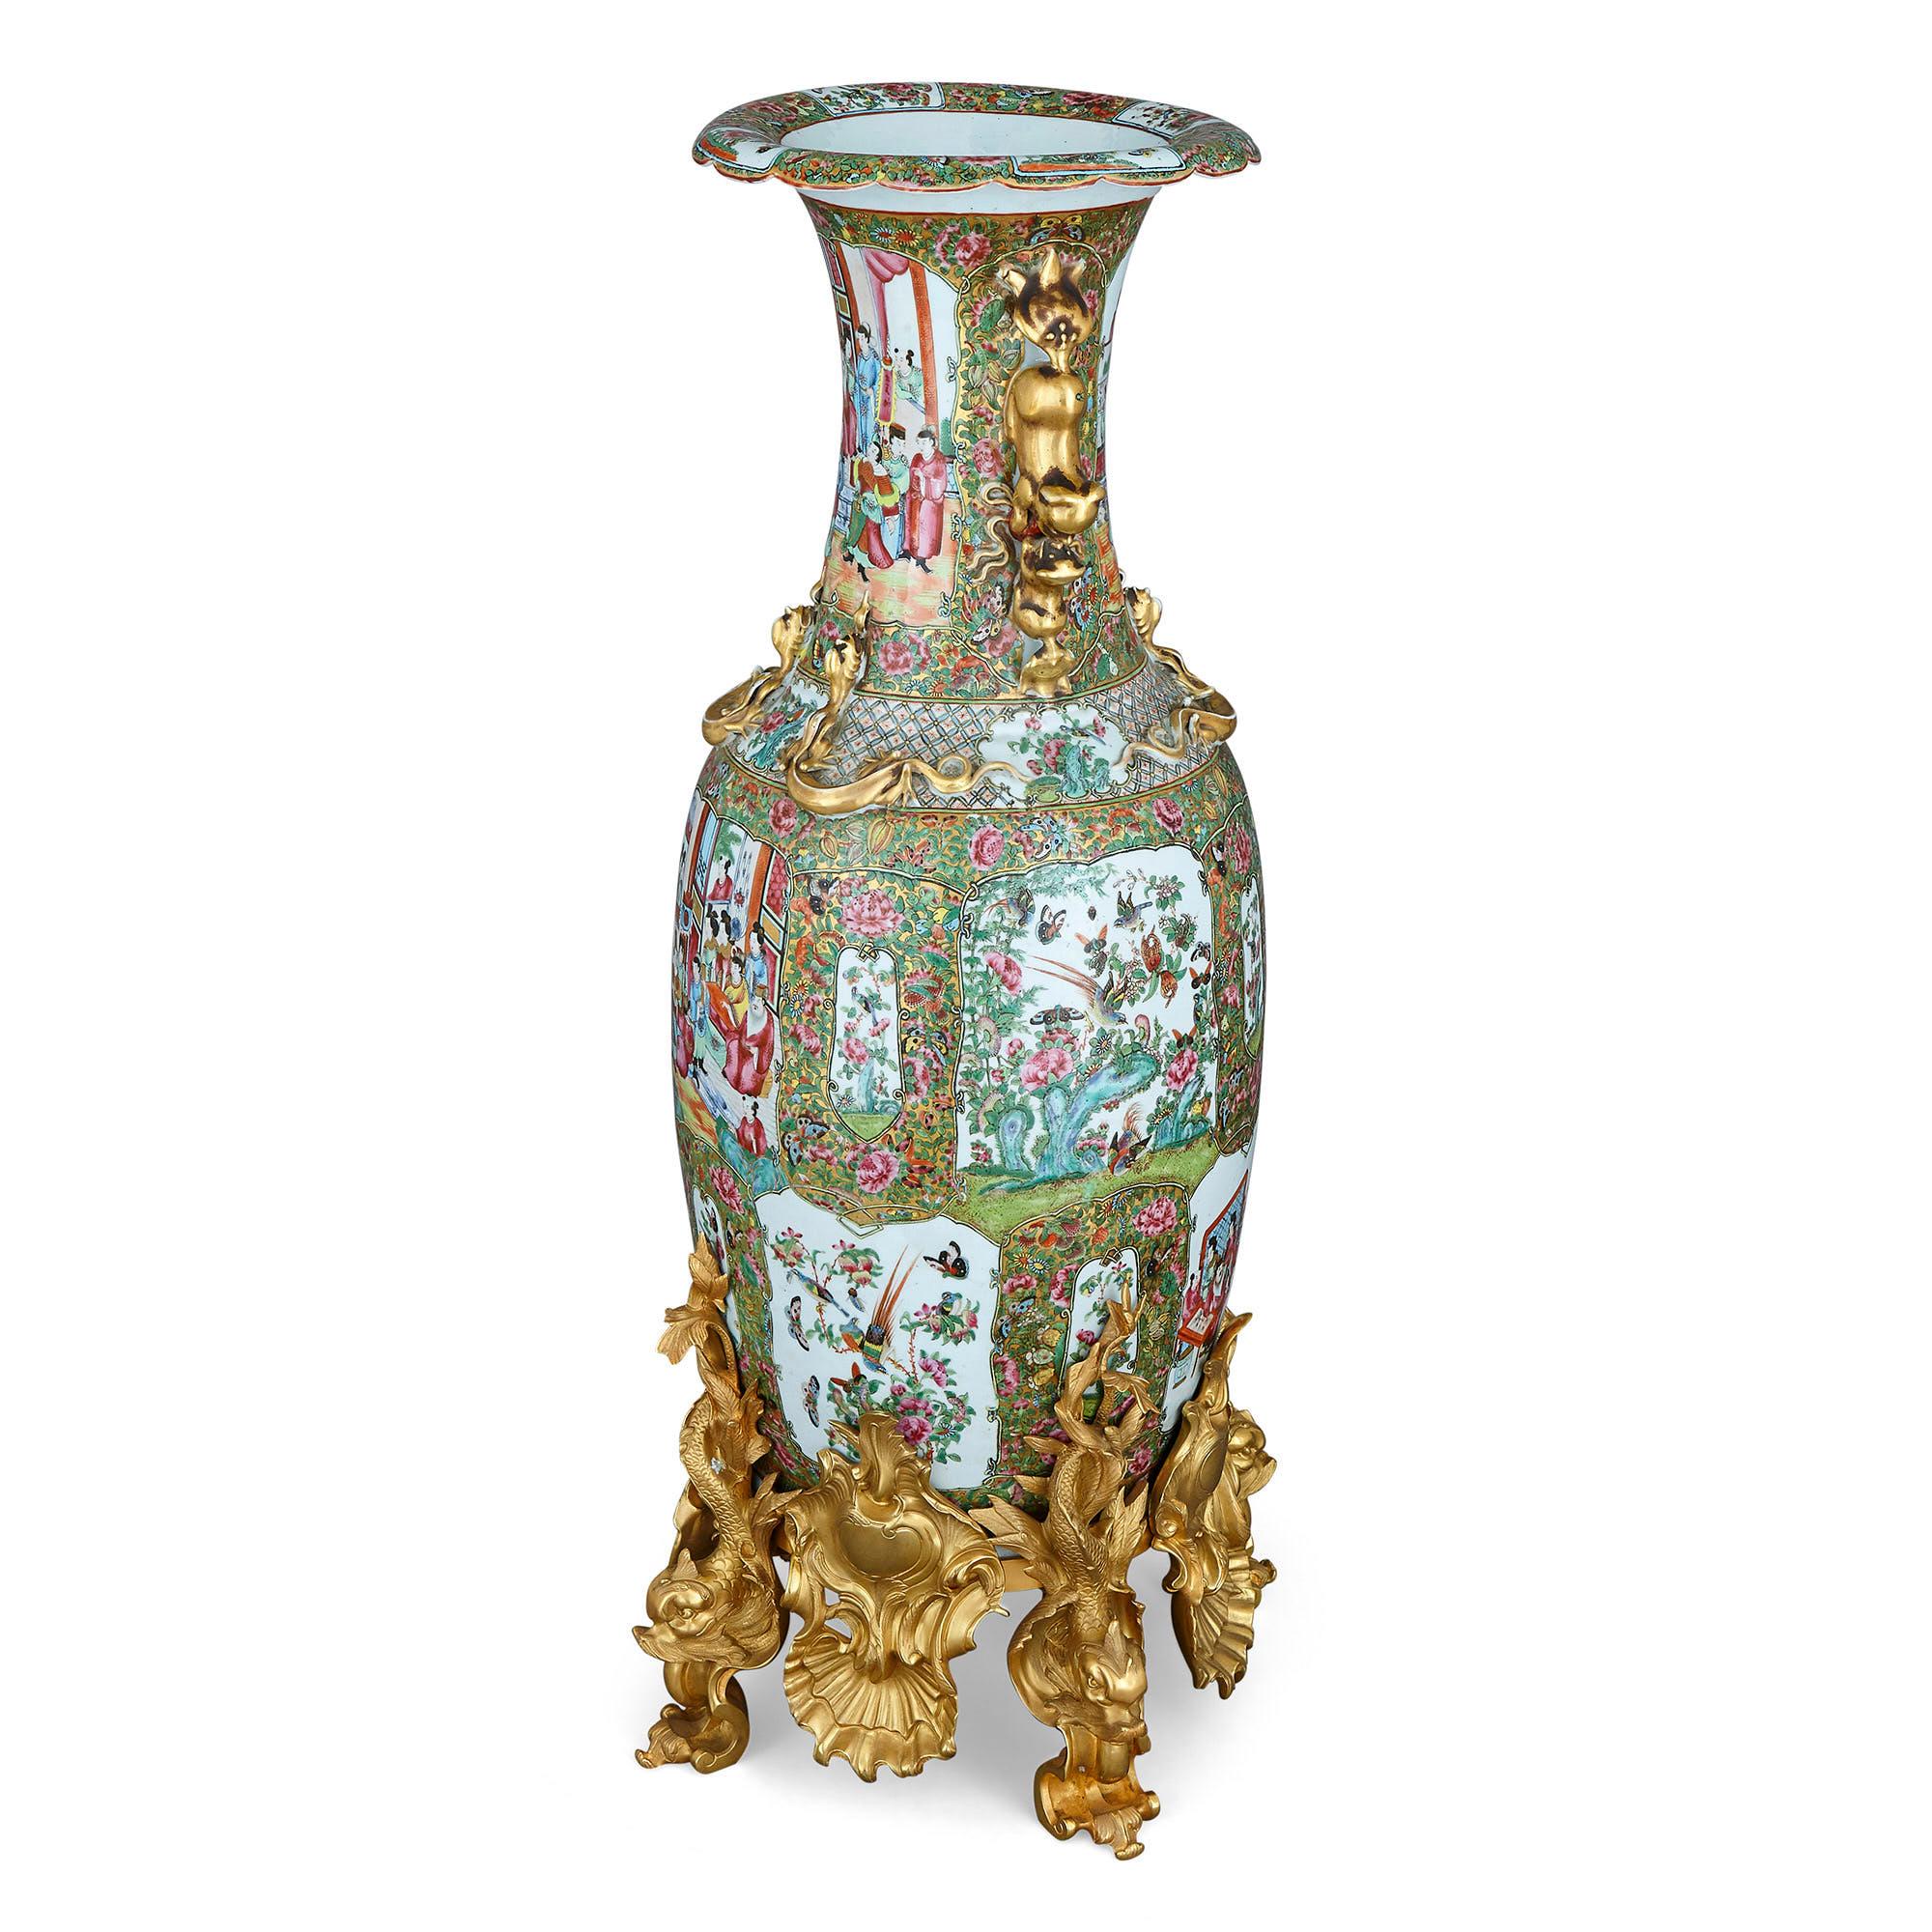 Pair of large Chinese Canton famille verte ormolu mounted porcelain vases
Chinese, 19th century
Measures: height 107cm, diameter 37cm

This magnificent pair of Chinese vases, from the city of Canton, are decorated in the so-called famille verte